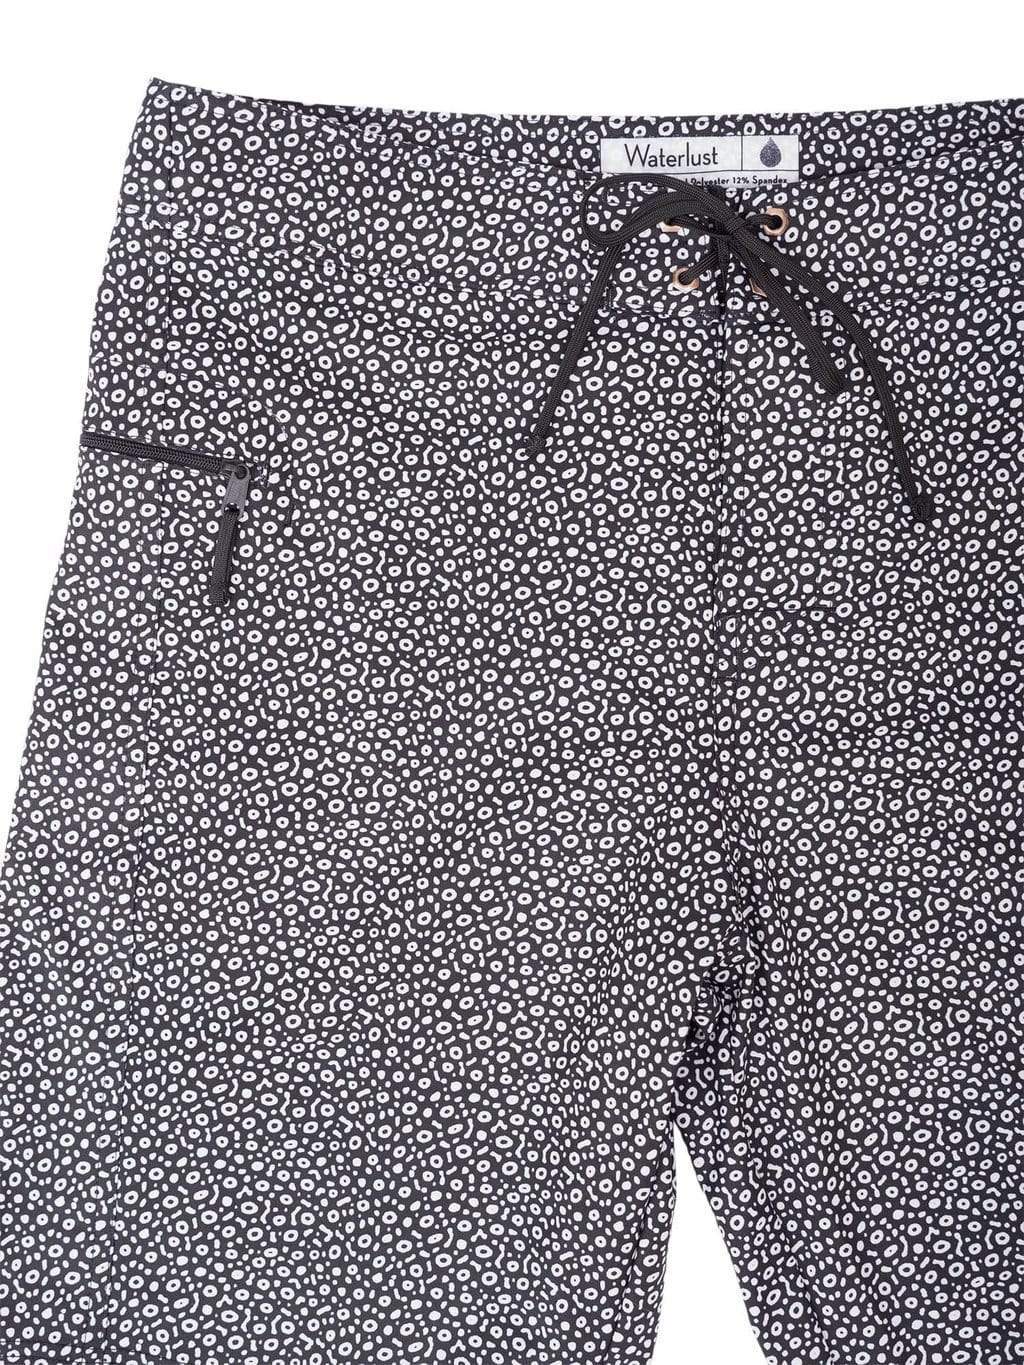 Waterlust Spotted Eagle Ray Boardshorts